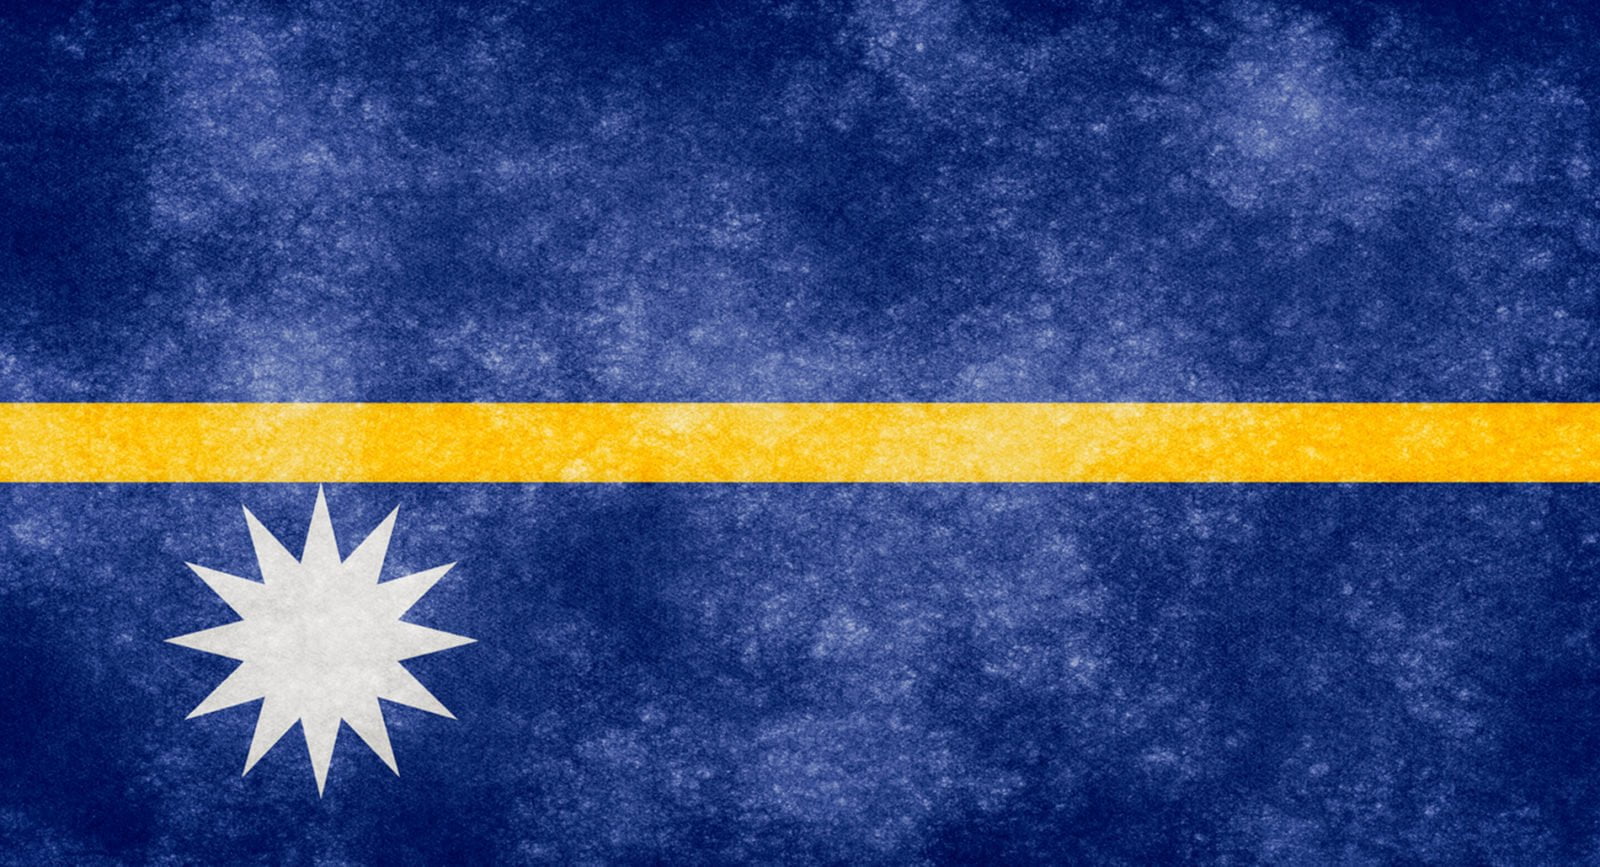 A textured graphic of the Nauru flag